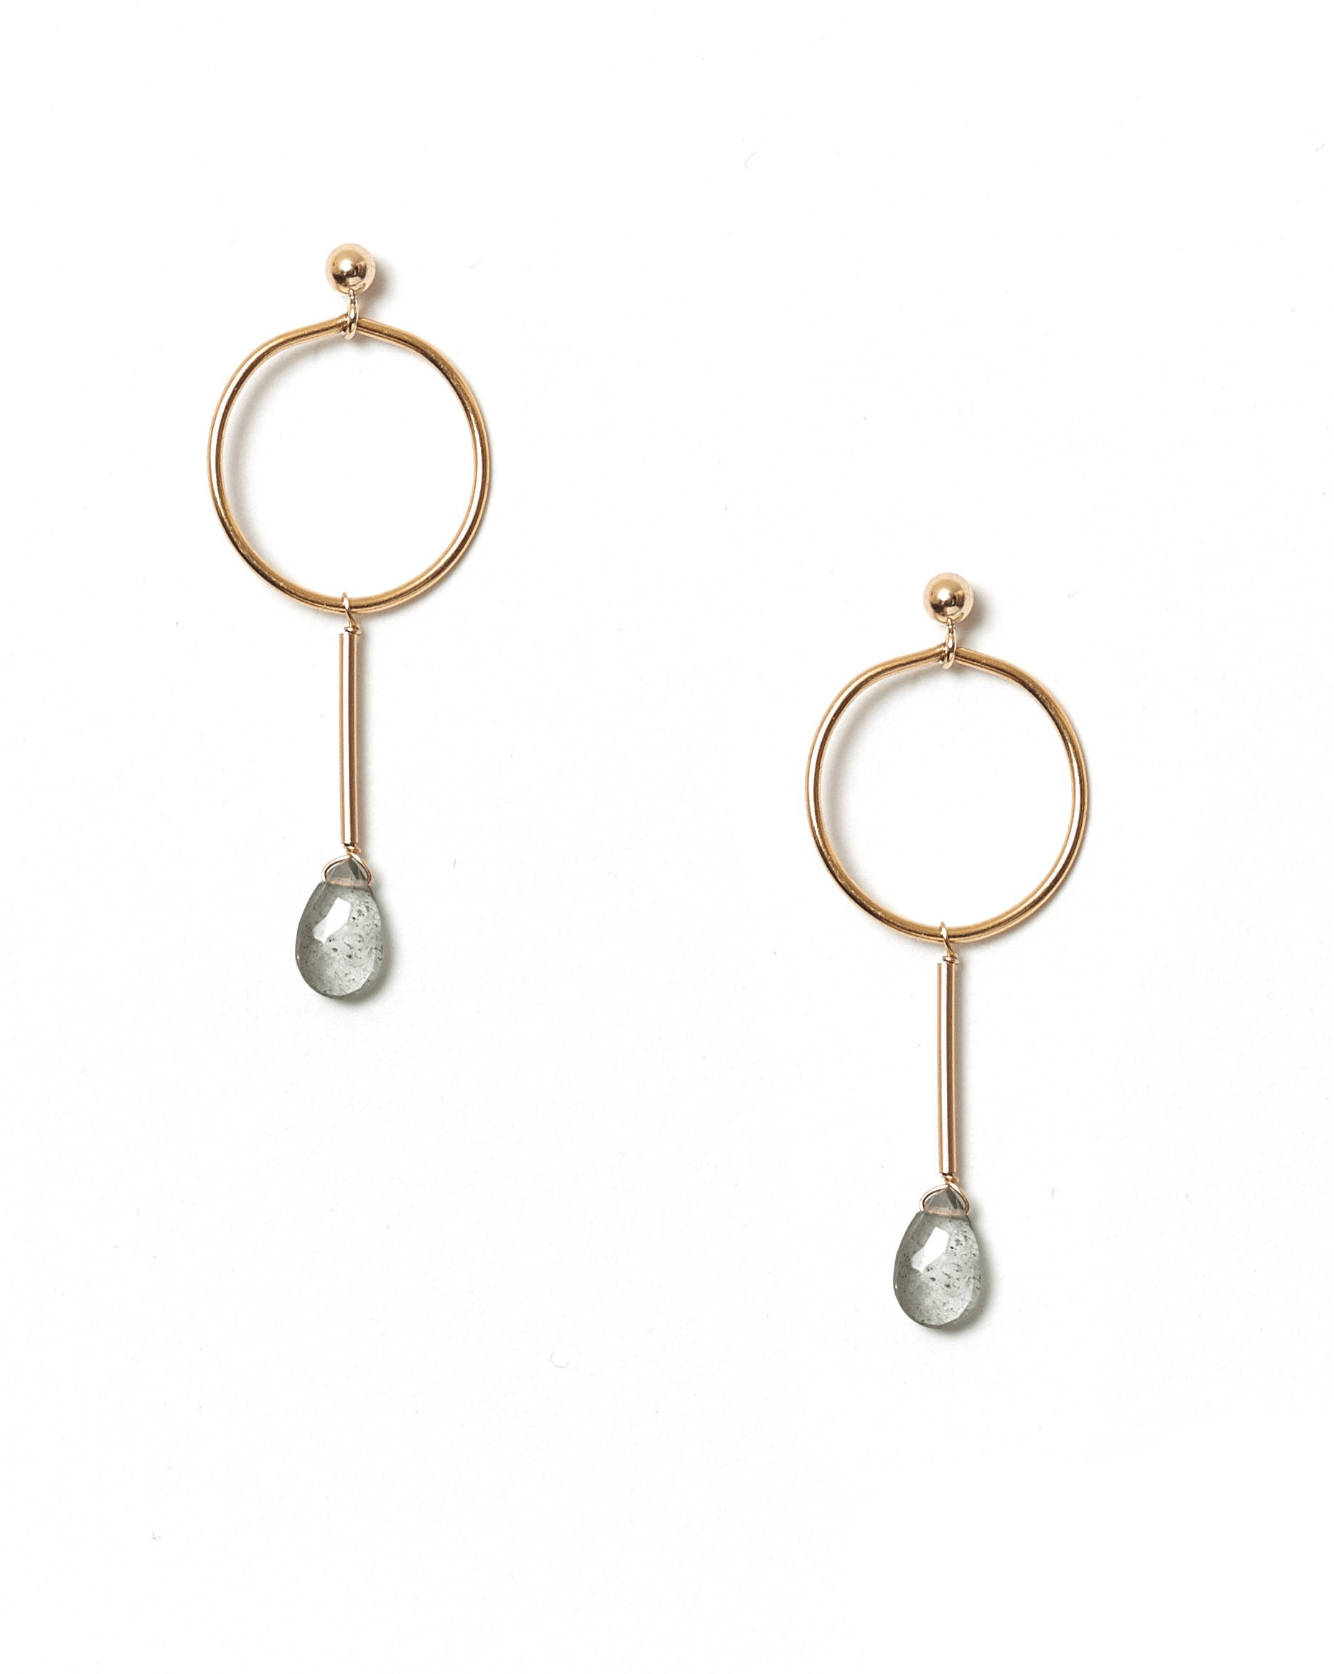 Osea Earrings by KOZAKH. Ball stud drop earrings in 14K Gold Filled, featuring a faceted Moss Aquamarine droplet.